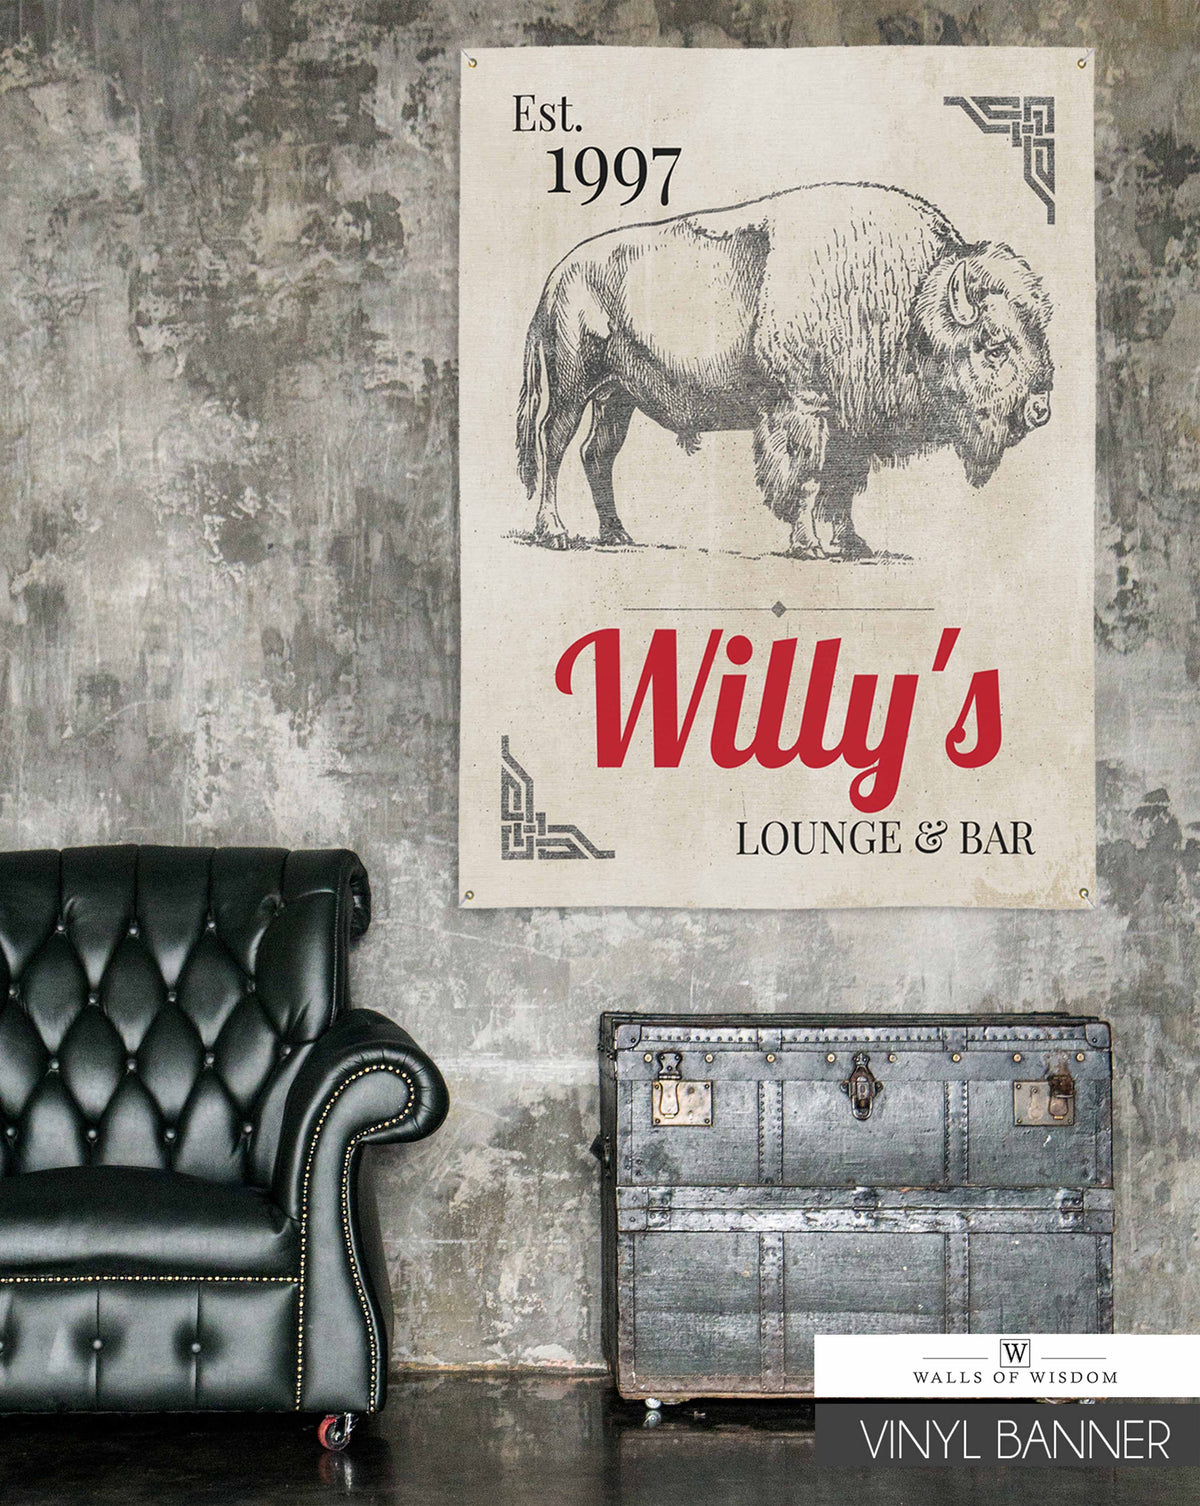 Rustic Bison Decor for Your Home Bar and Outdoor Lounge - Distressed Details